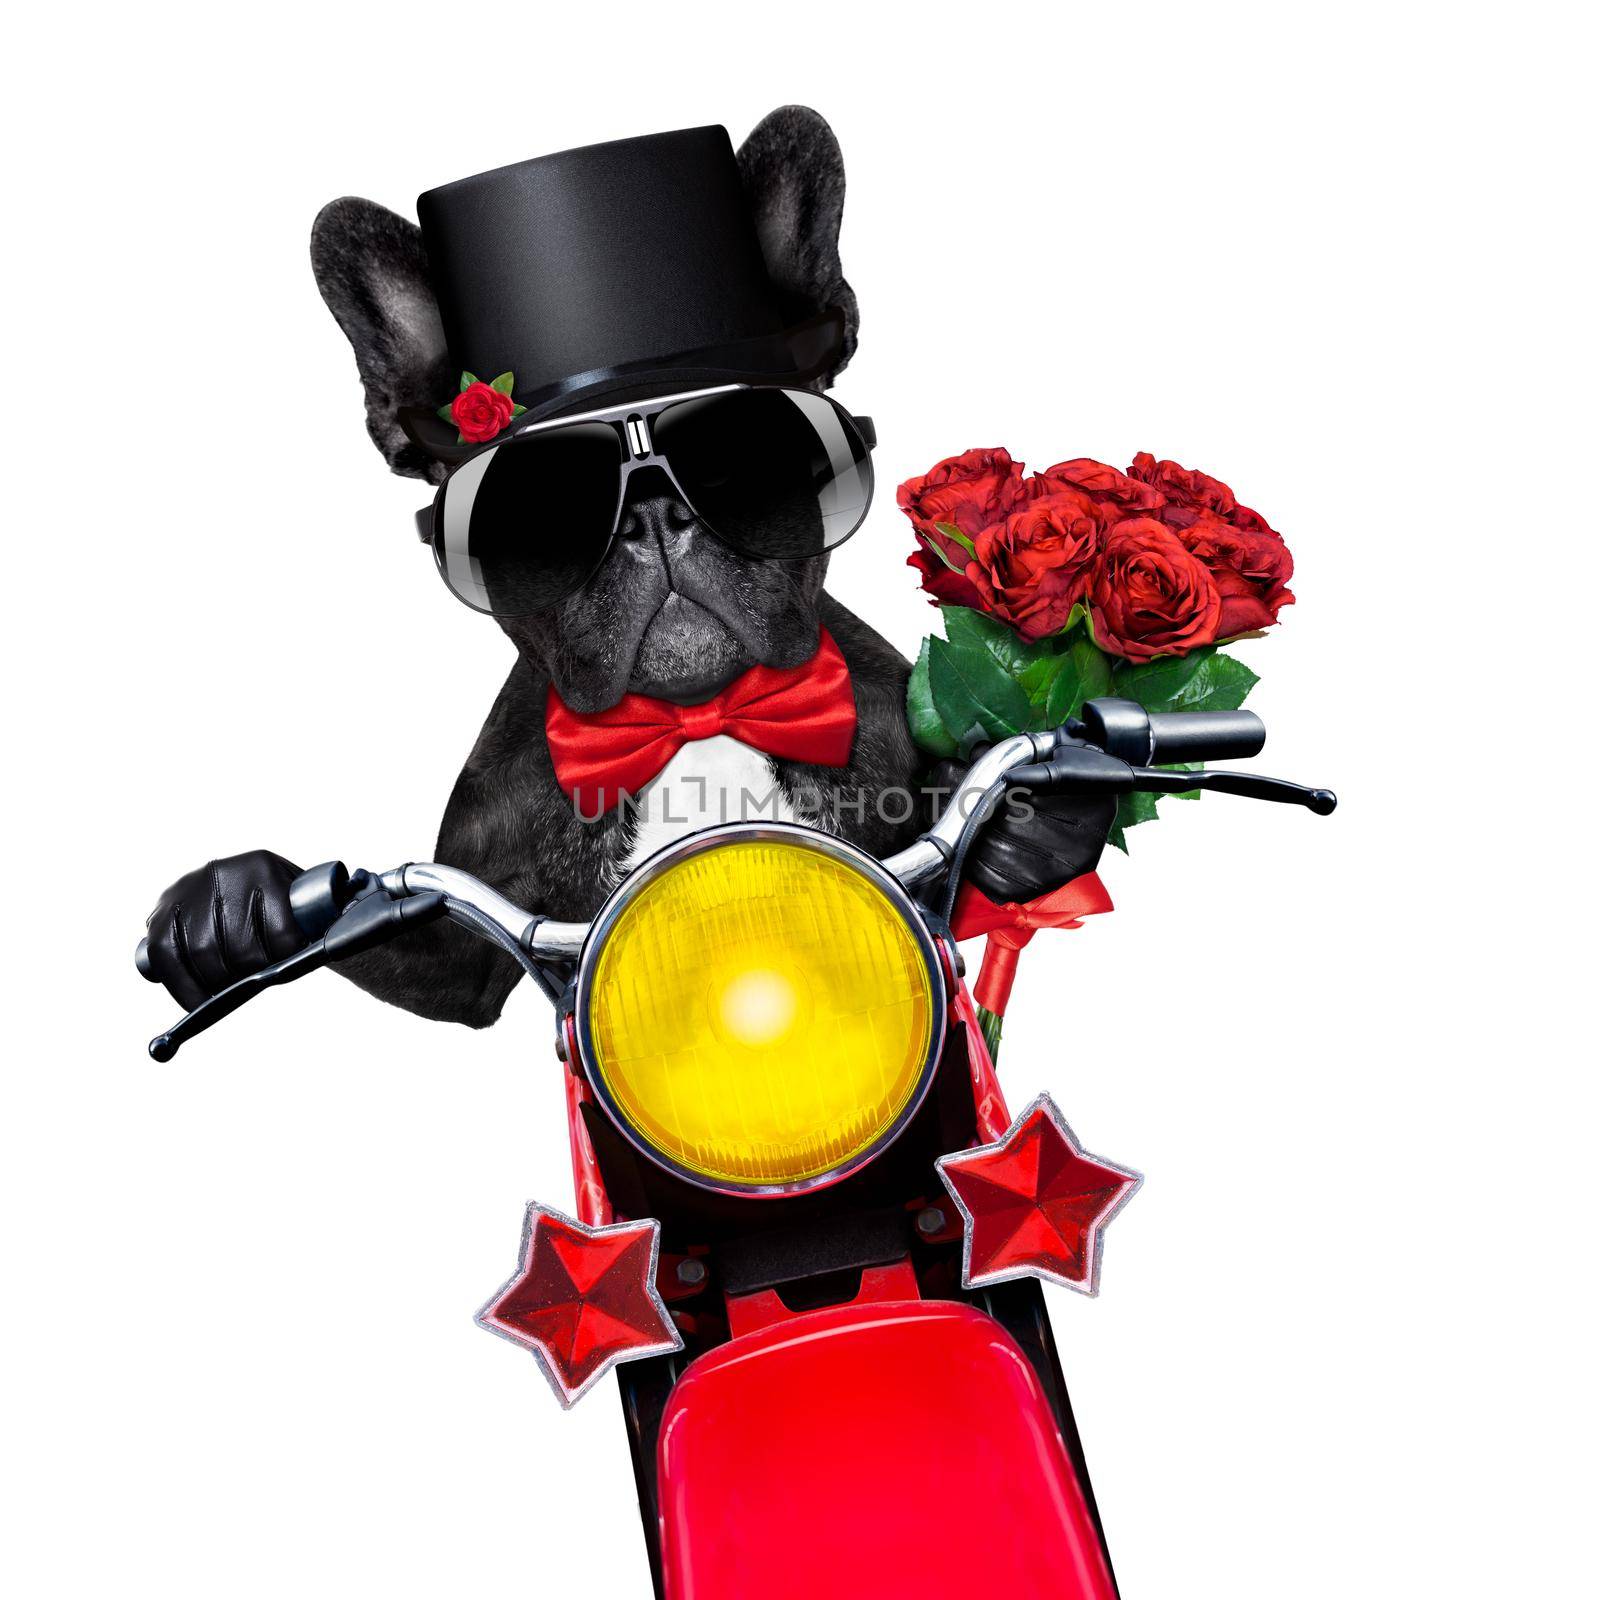 valentines french bulldog dog , riding a motorbike , holding a bunch of red roses, isolated on white background